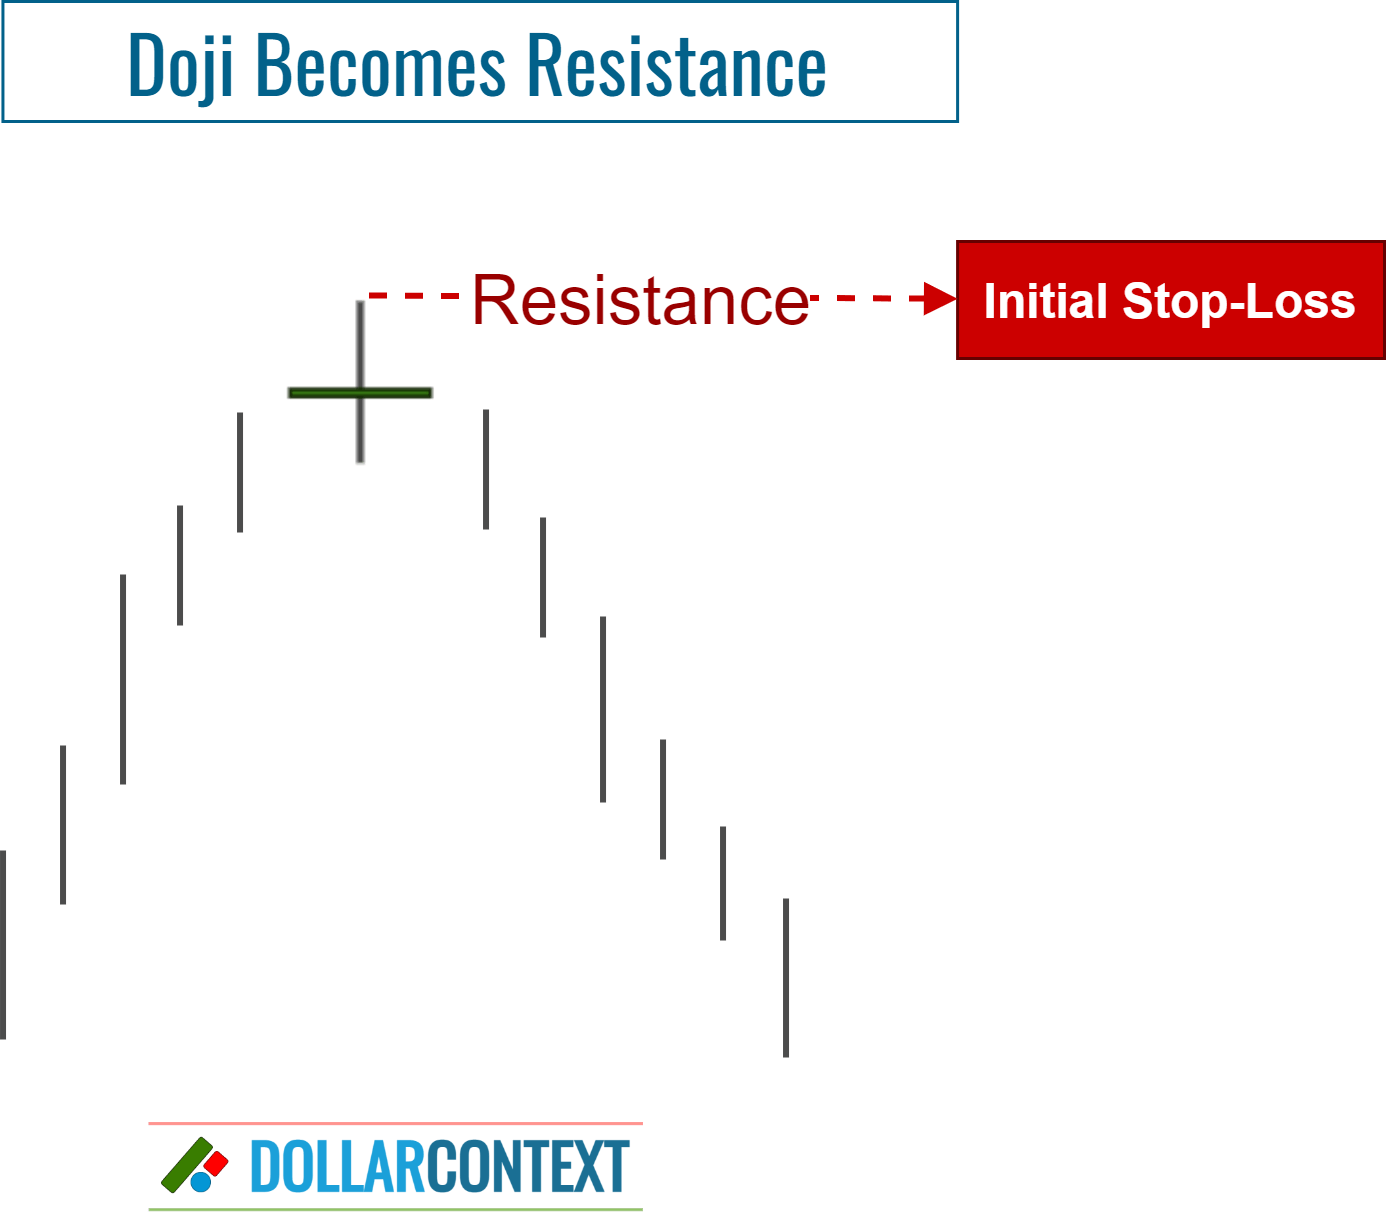 Initial Stop-Loss with a Doji After an Uptrend